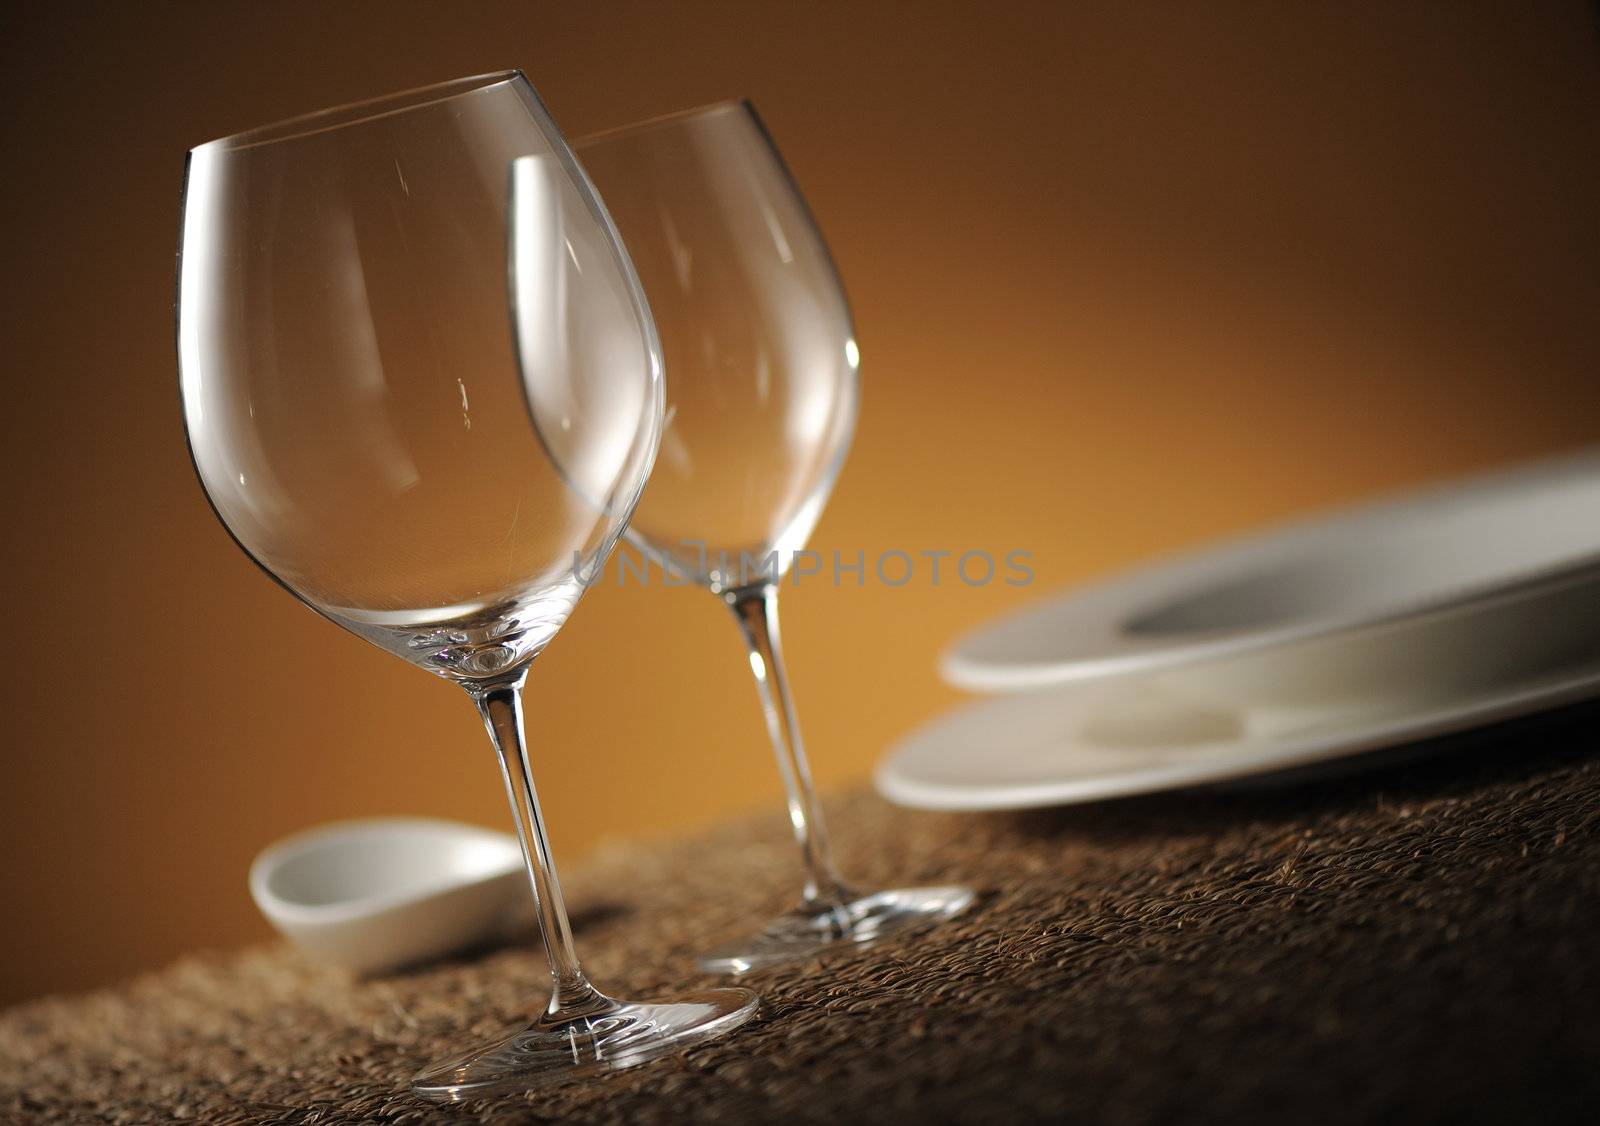 Dinner place setting with plates, glasses and cutlery shallow do by stokkete